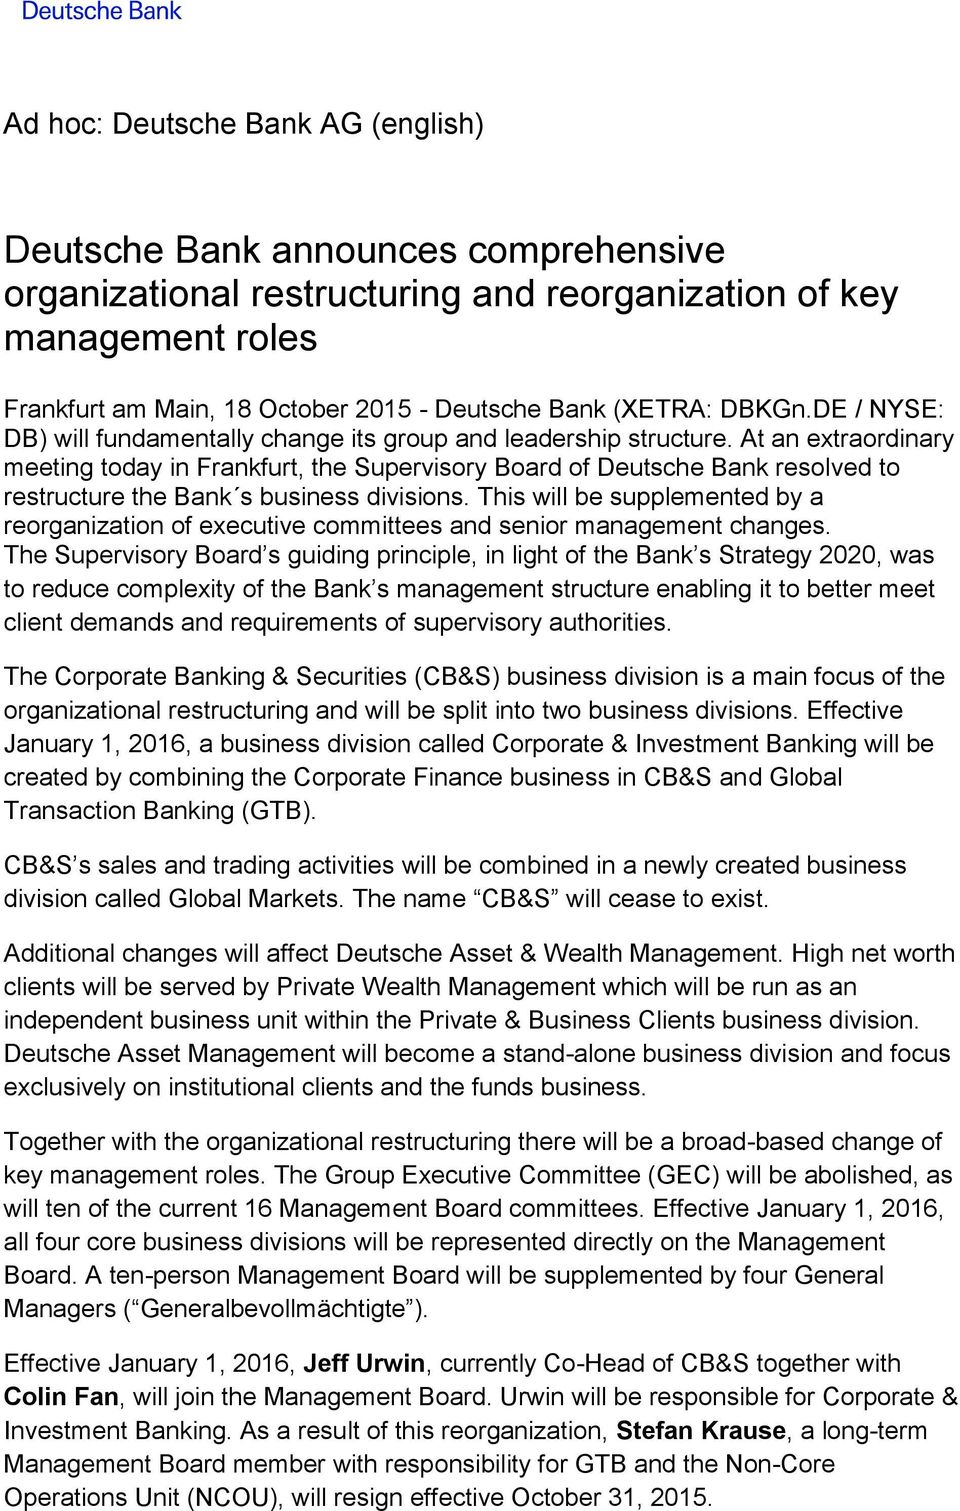 At an extraordinary meeting today in Frankfurt, the Supervisory Board of Deutsche Bank resolved to restructure the Bank s business divisions.